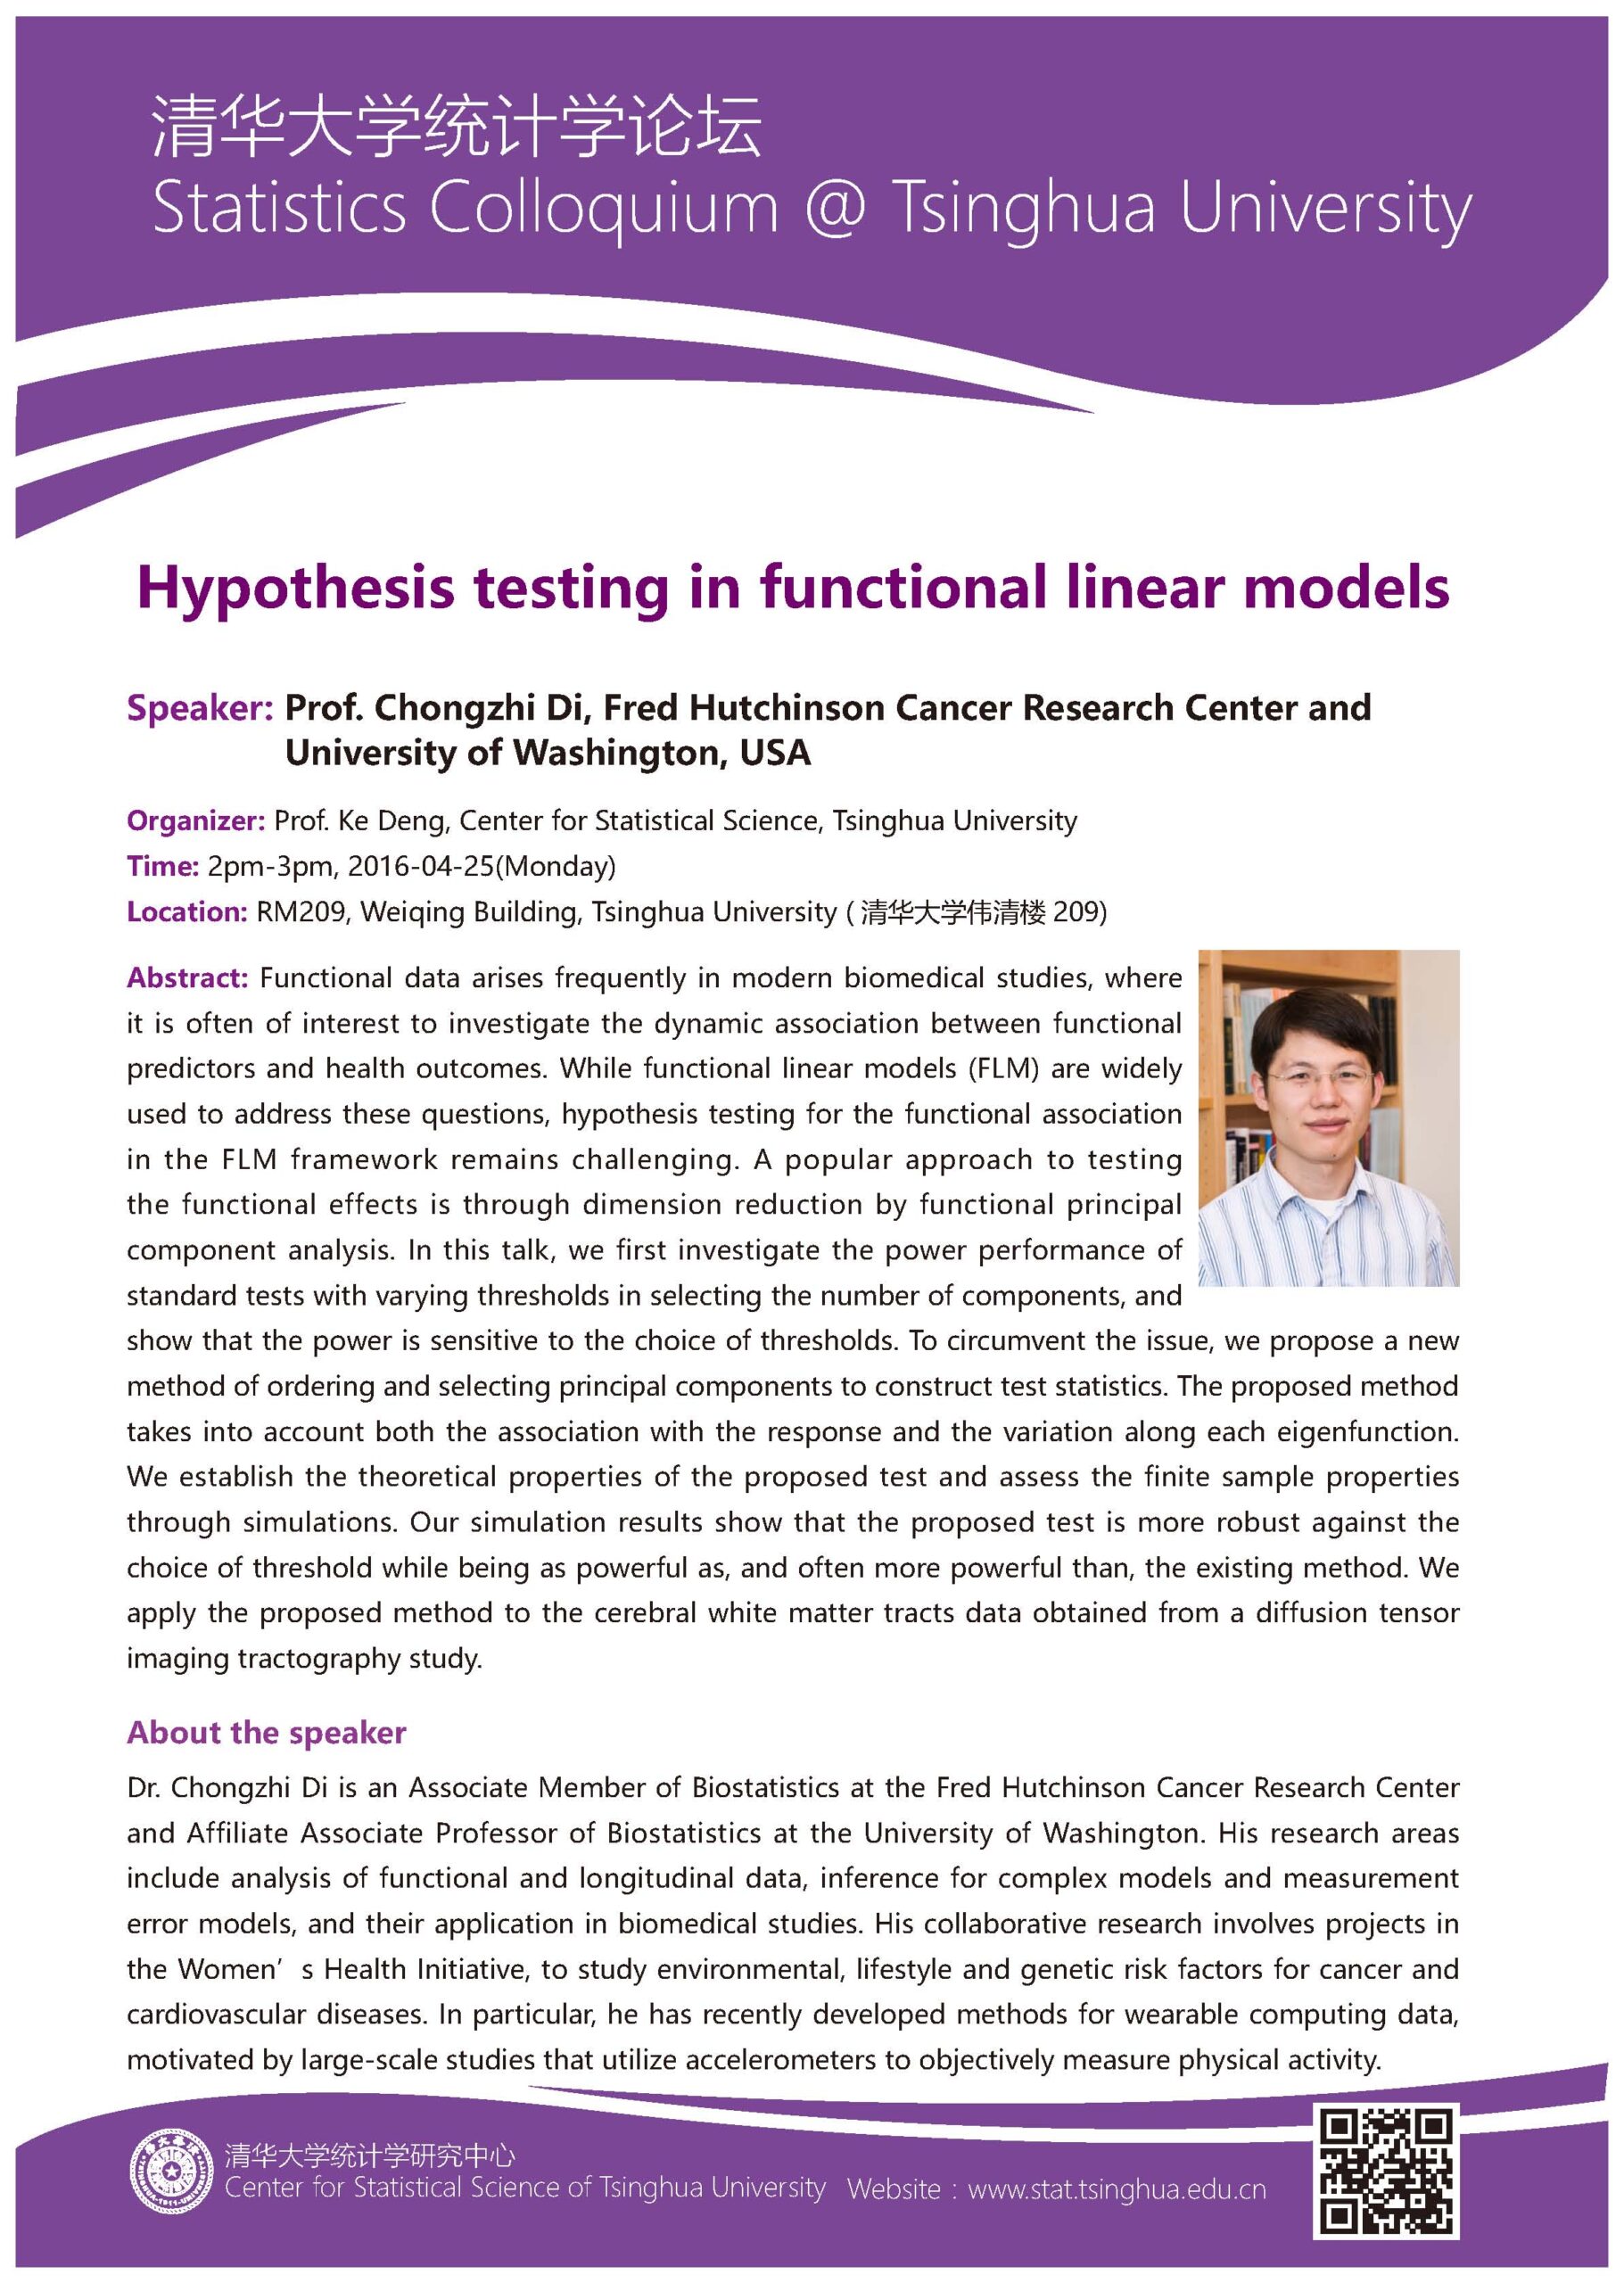 Hypothesis Testing in Functional Linear Models